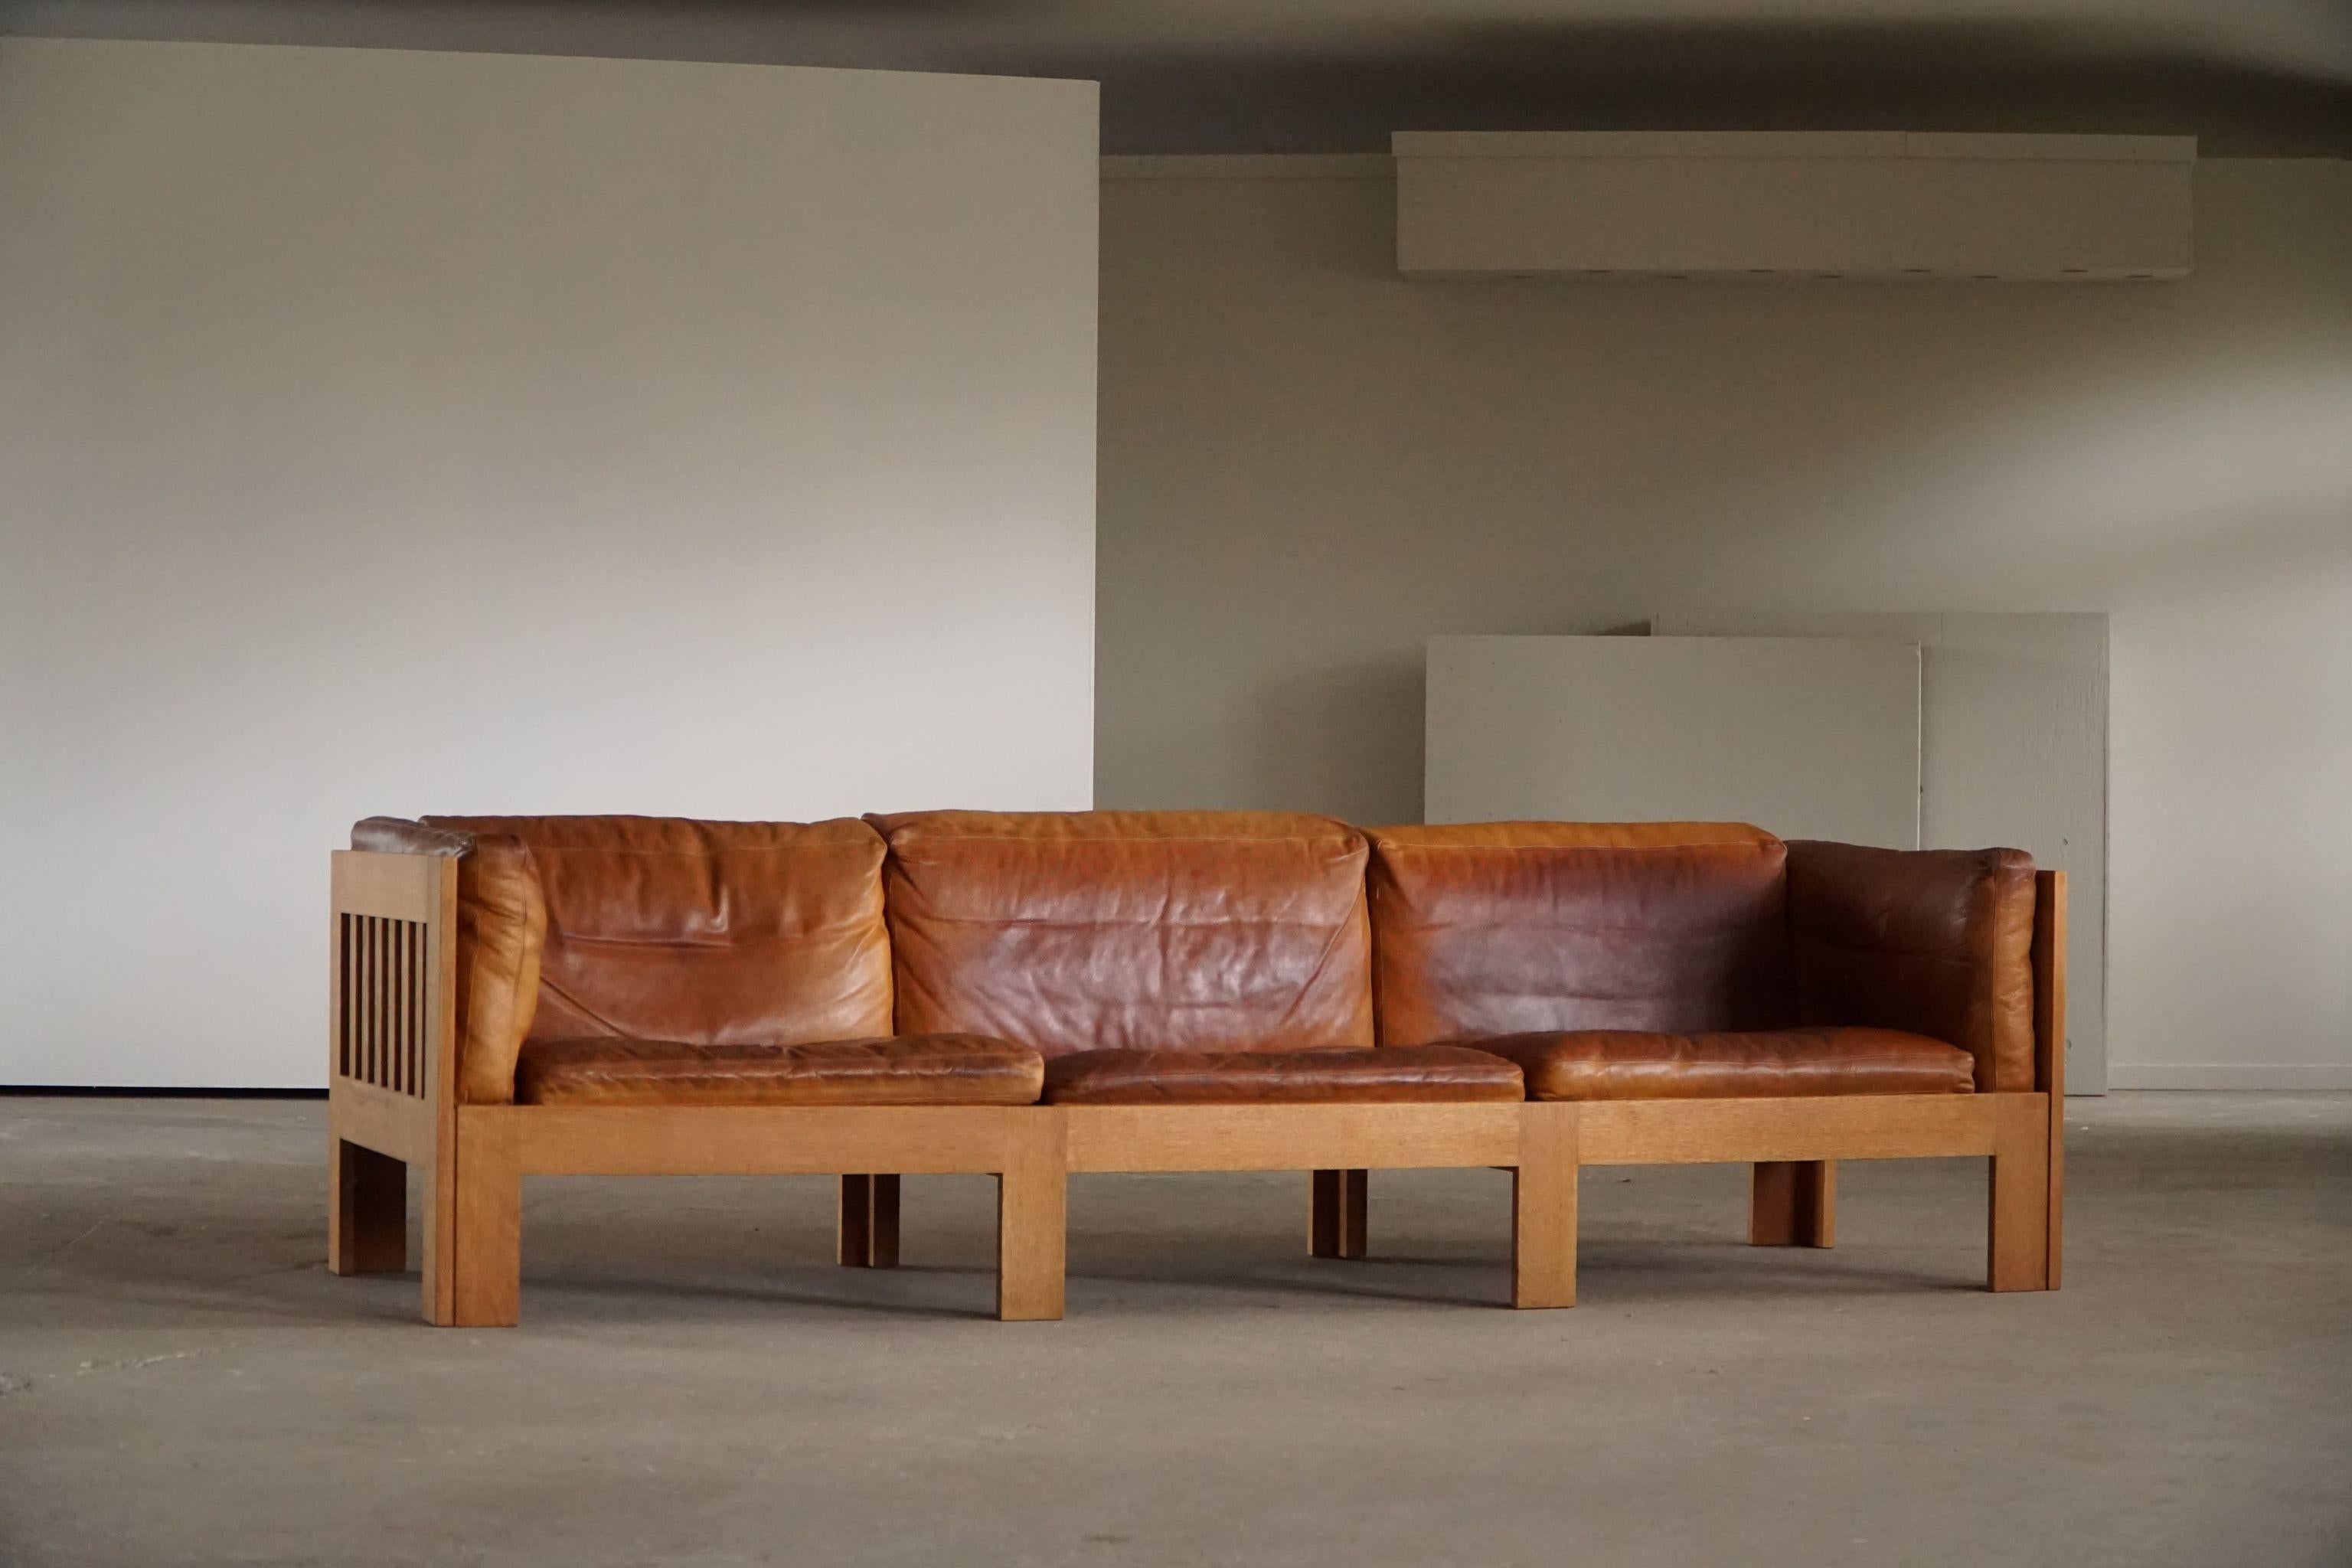 Lovely 3 seater sofa in oak with nice warm patinated leather cushions. Designed by Danish architect Tage Poulsen, model TP632. Designed in 1962. 

This sofa can be freestanding and fit any kind of interior style. From a Classic home to a